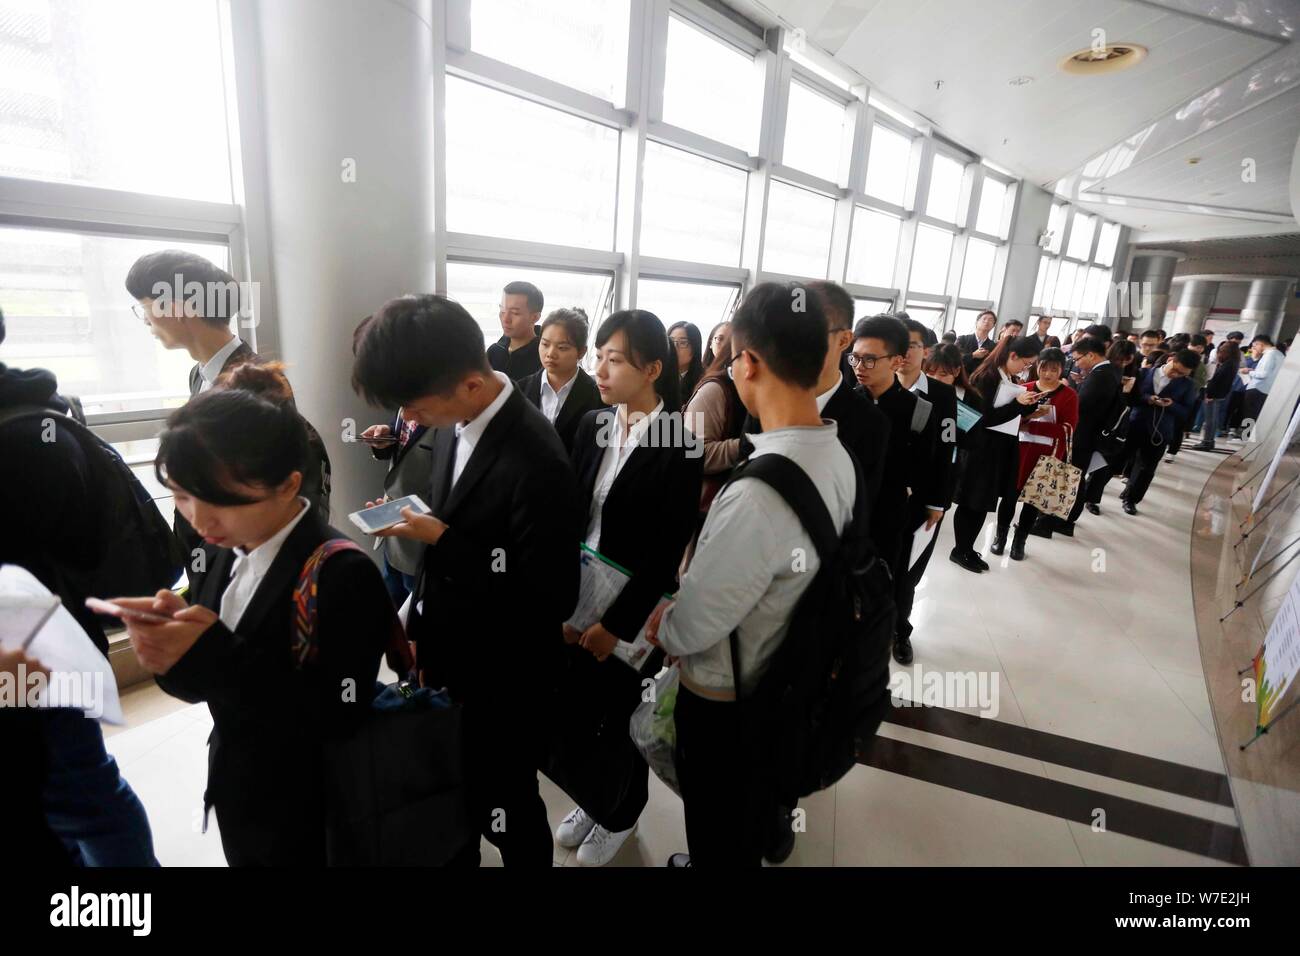 Chinese job seekers queue up to have a talk with interviewers to look for employment in financial sector at a job fair in Shanghai, China, 16 October Stock Photo